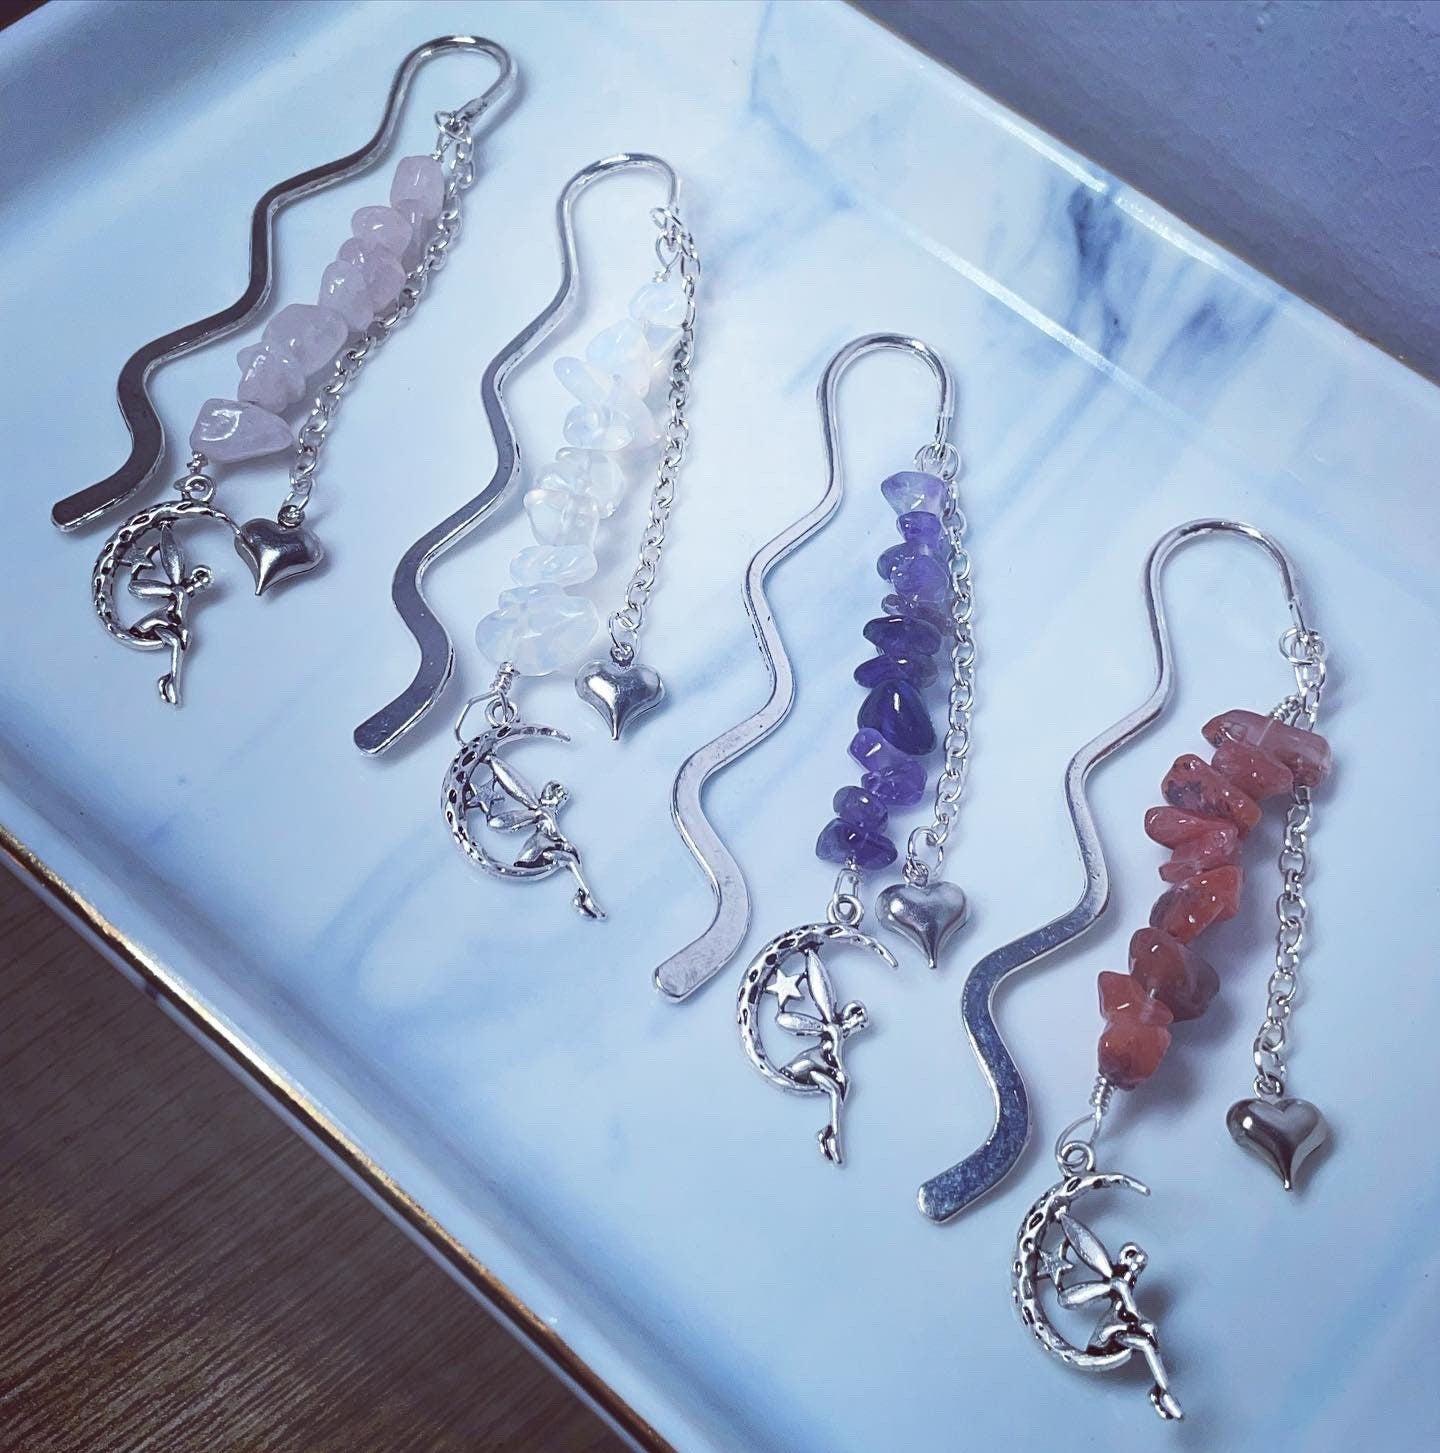 Crystal fairy and heart charm bookmarks/book charms